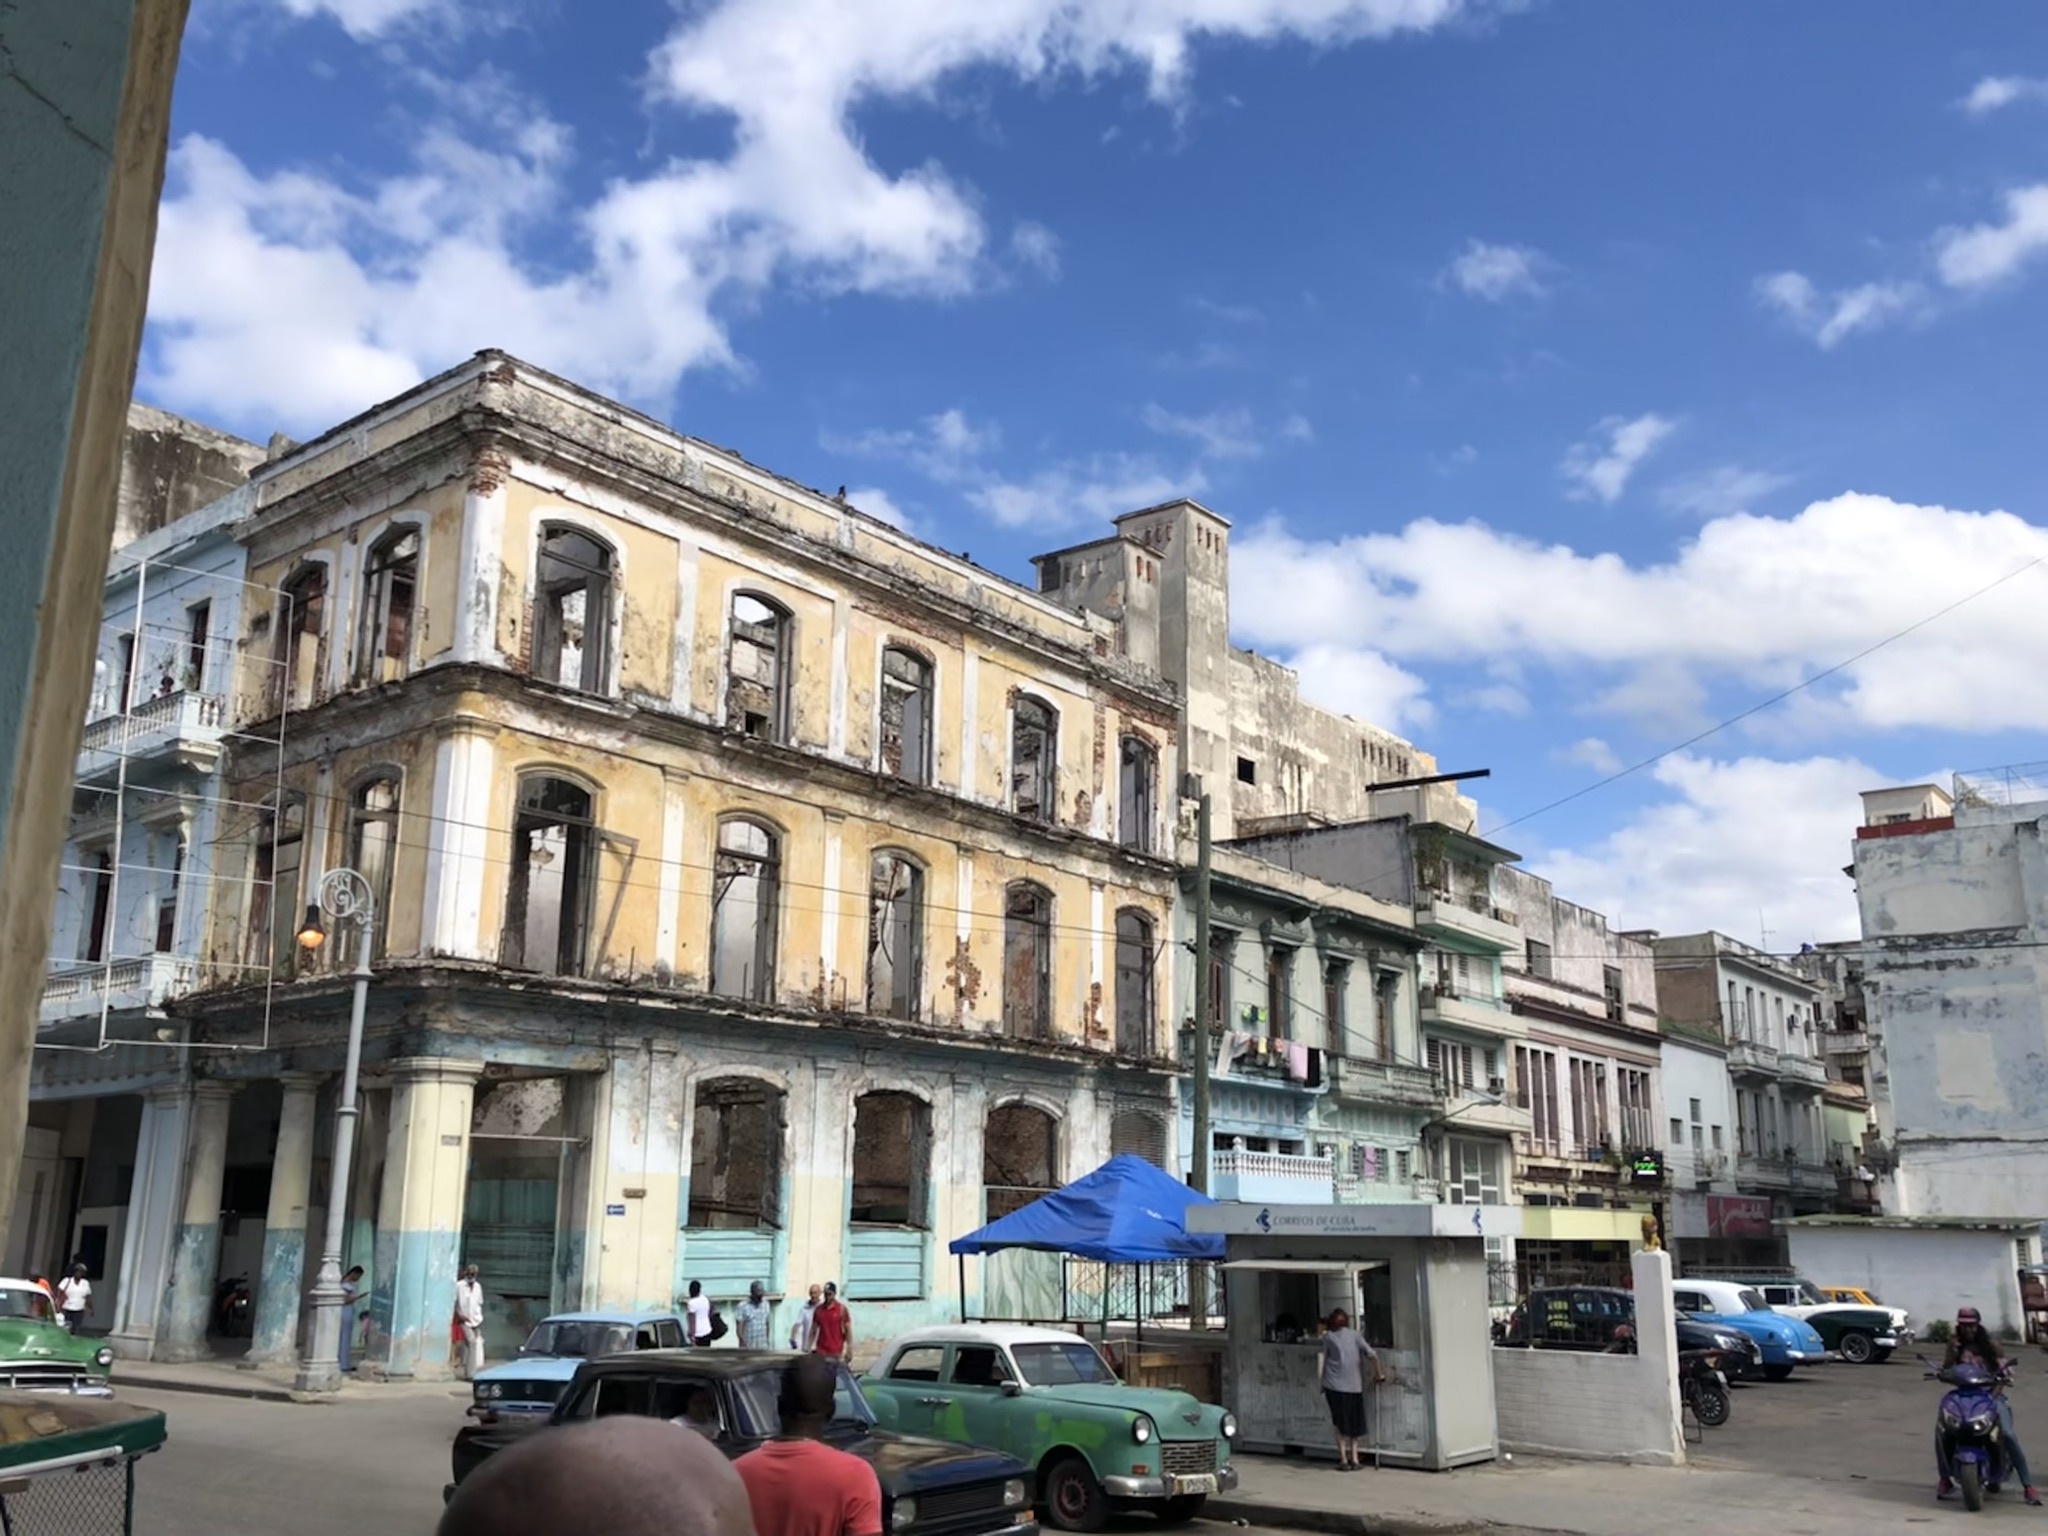 A decaying building in central Havana